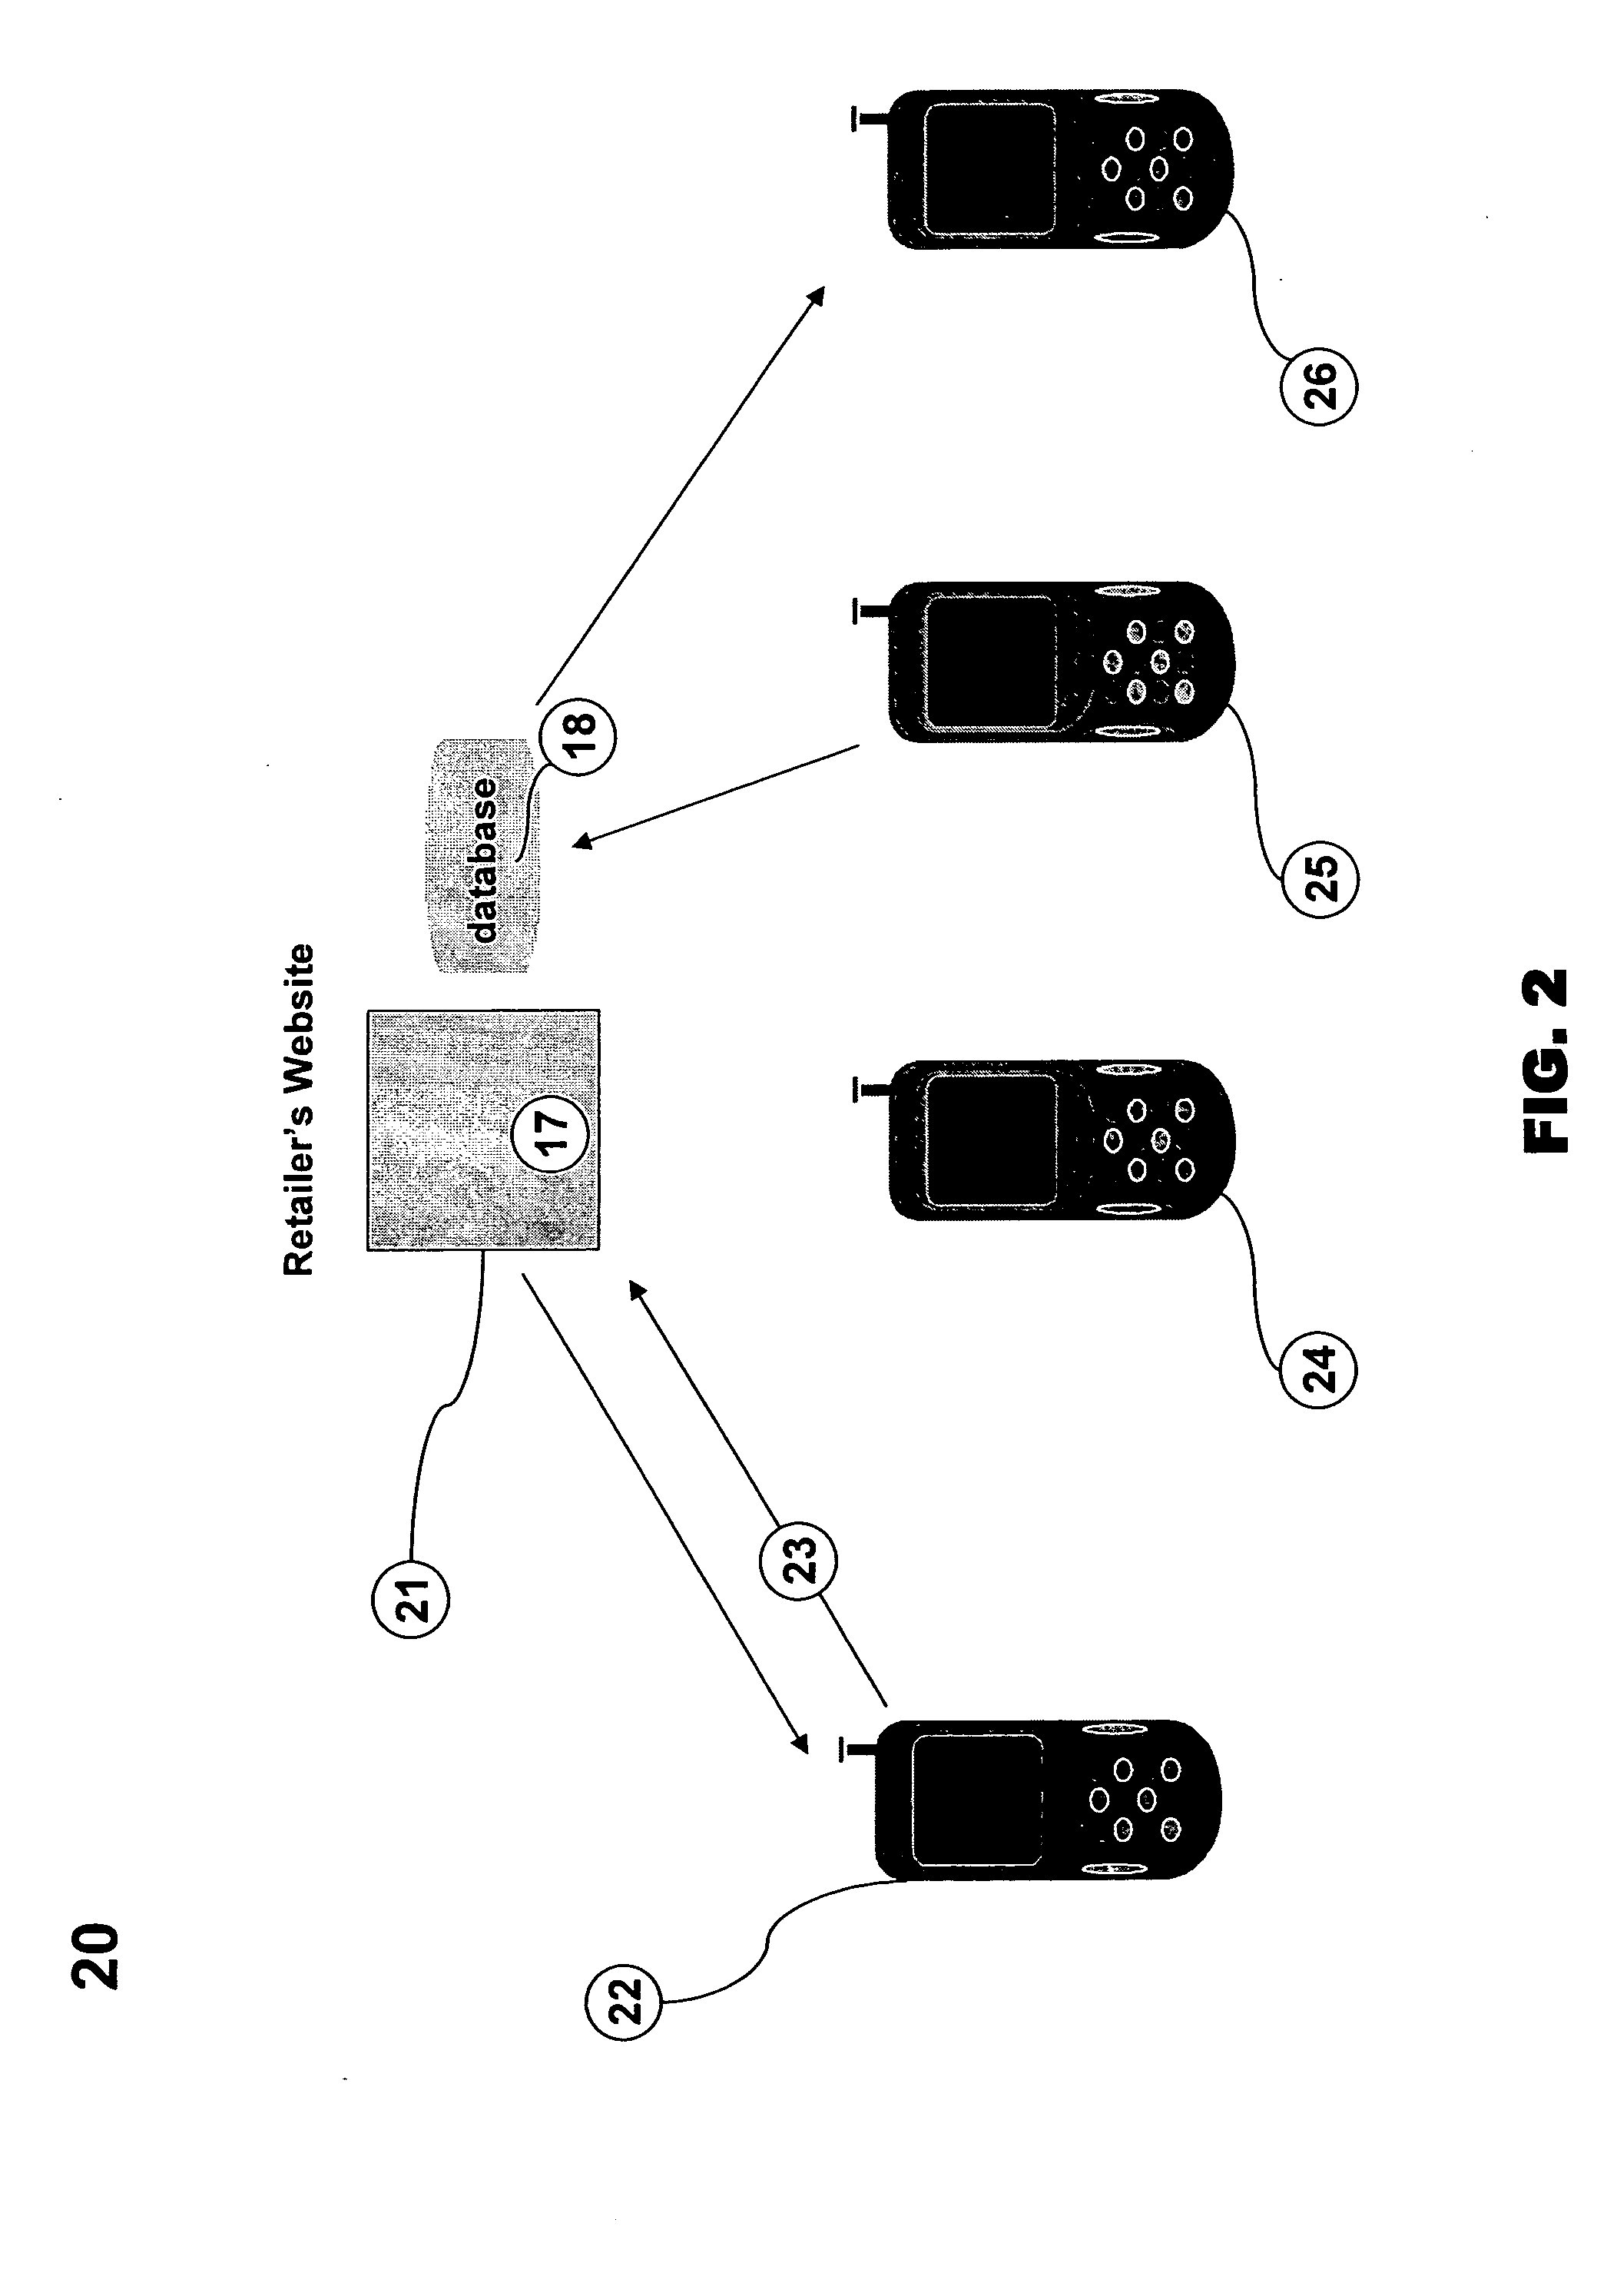 Wirelessly deliverable and redeemable secure couponing system and method